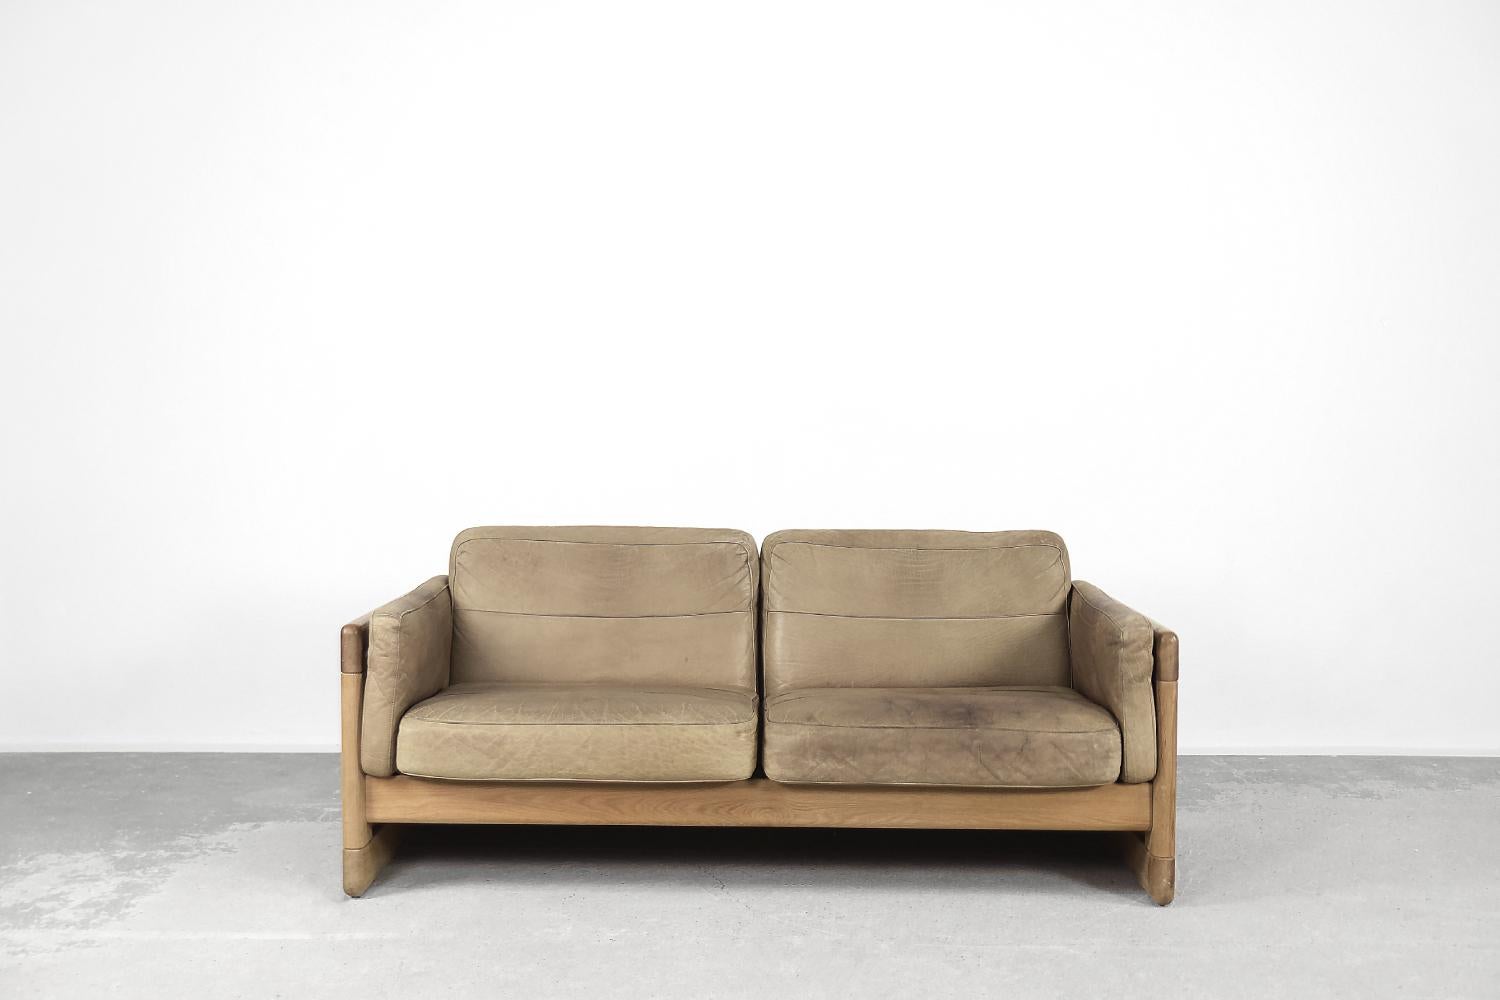 This two-seater sofa was produced in Scandinavia during the 1970s. The frame is made of solid oak wood with a natural color. The cushions are upholstered with natural leather in a shade of coffee brown. The sofa is equipped with side cushions. The